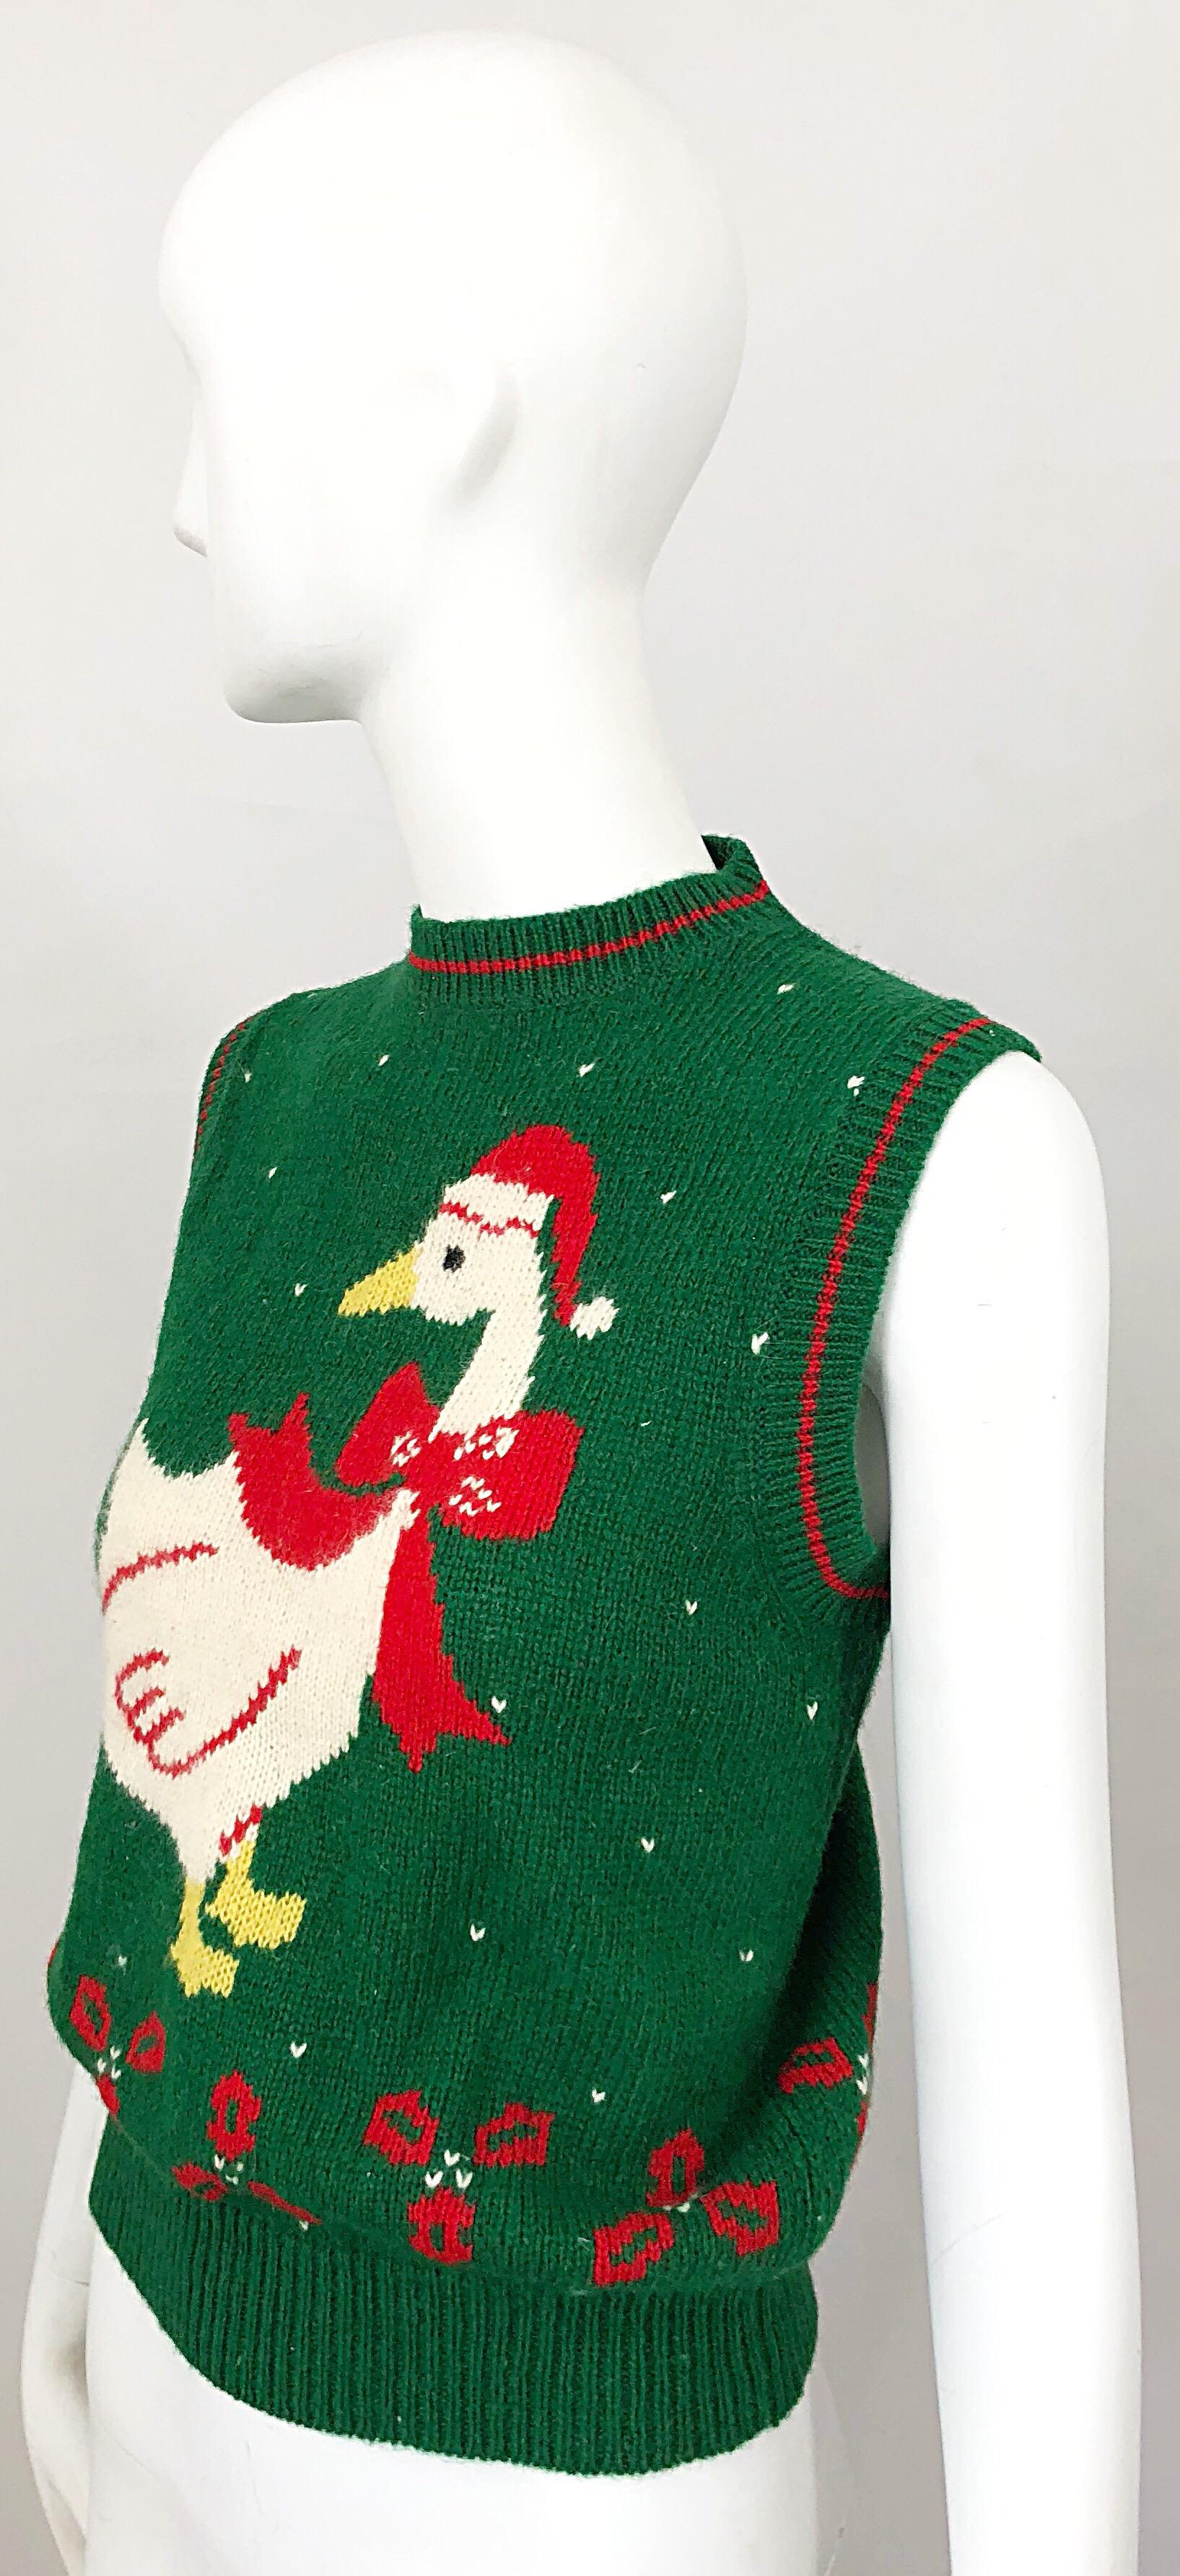 Blue 1970s Green and Red Intarsia Wool Swan Novelty 70s Christmas Sweater Vest